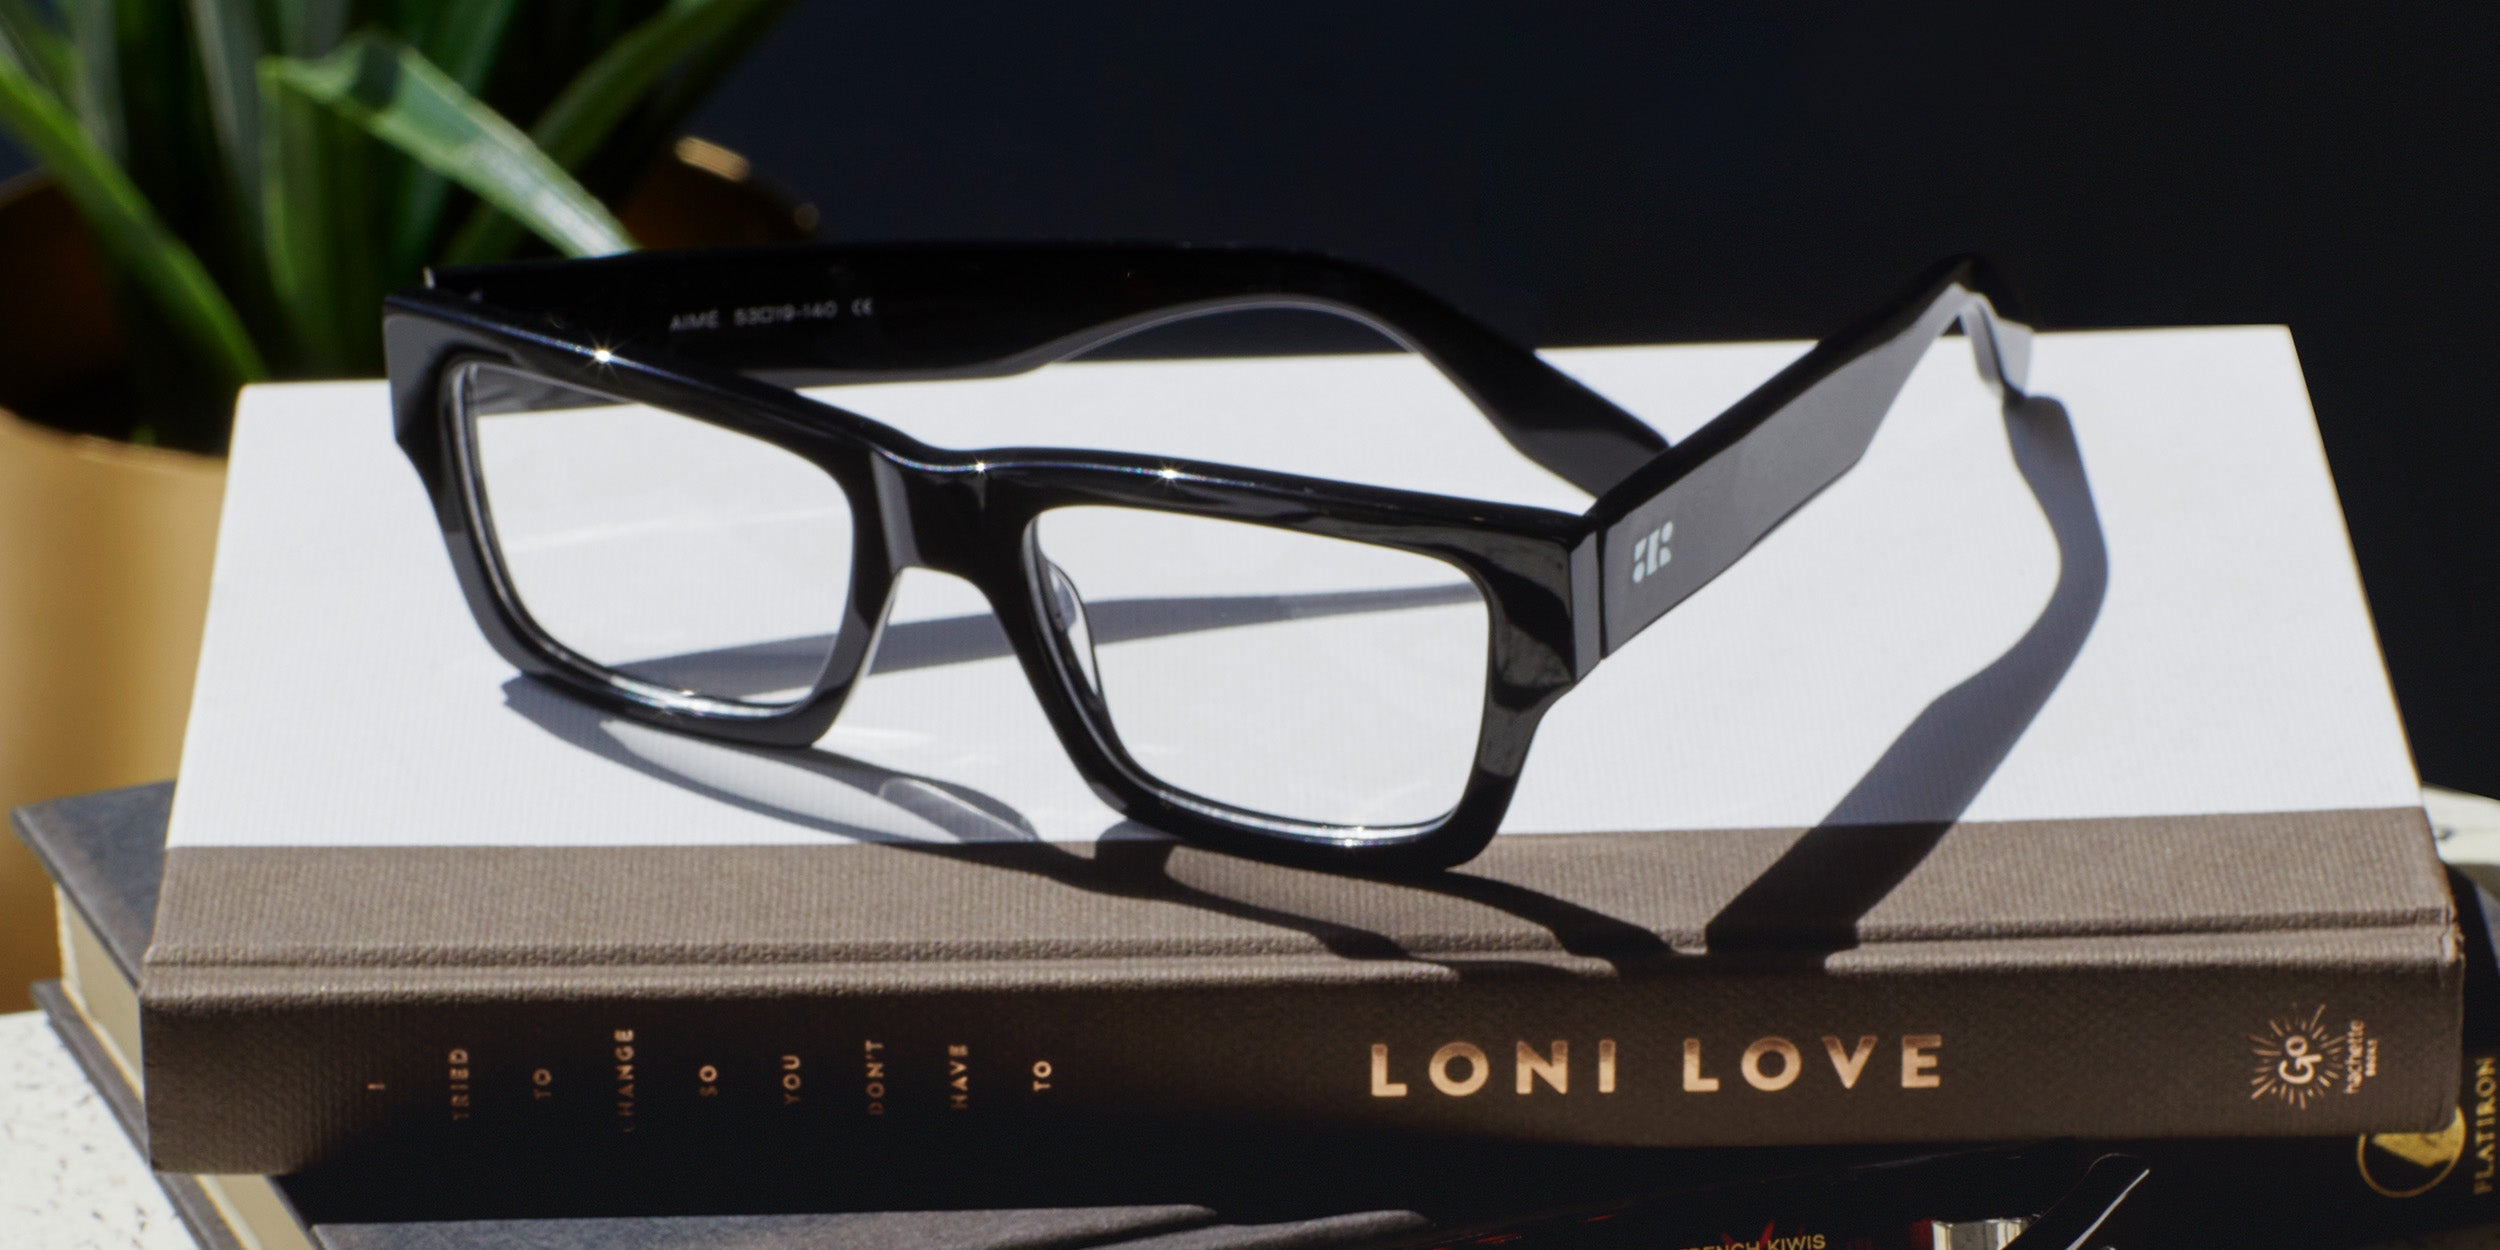 Photo Details of Aimé Grey Reading Glasses in a room